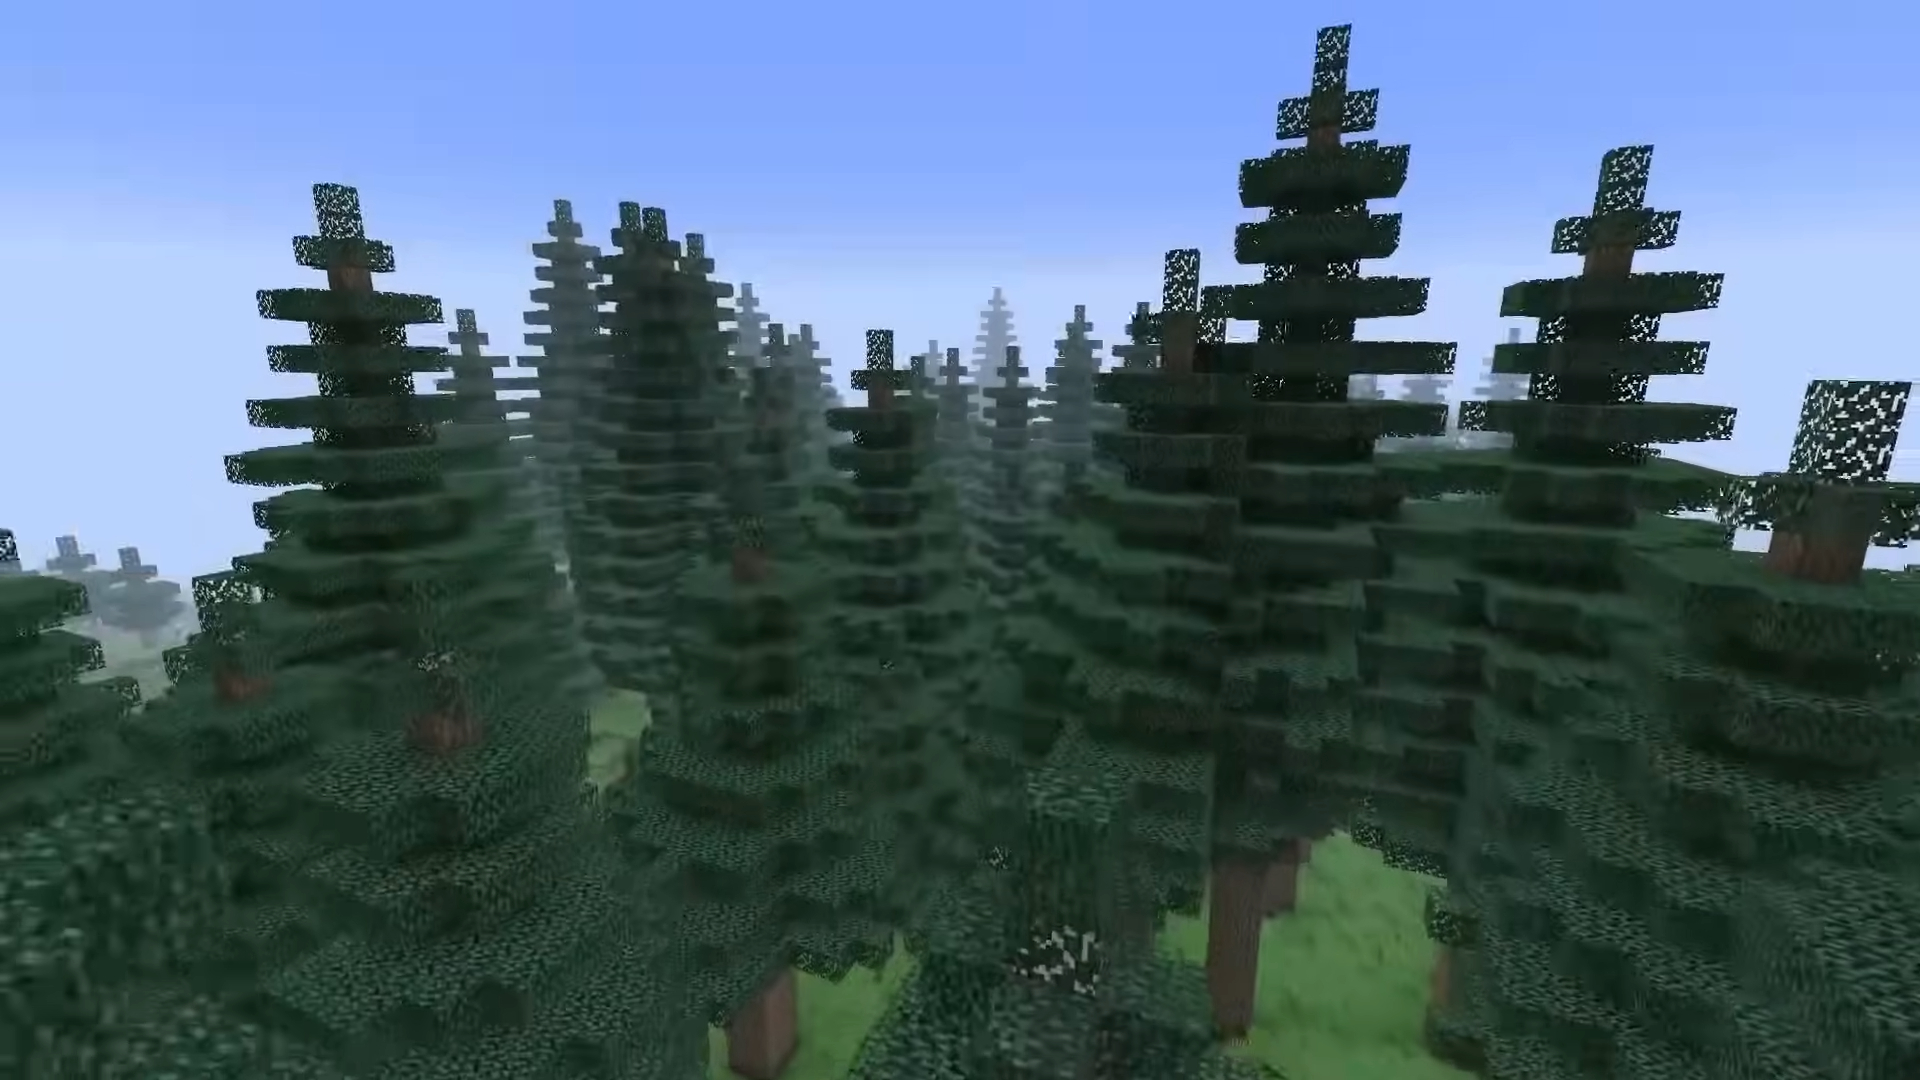 A forest biome in Minecraft.